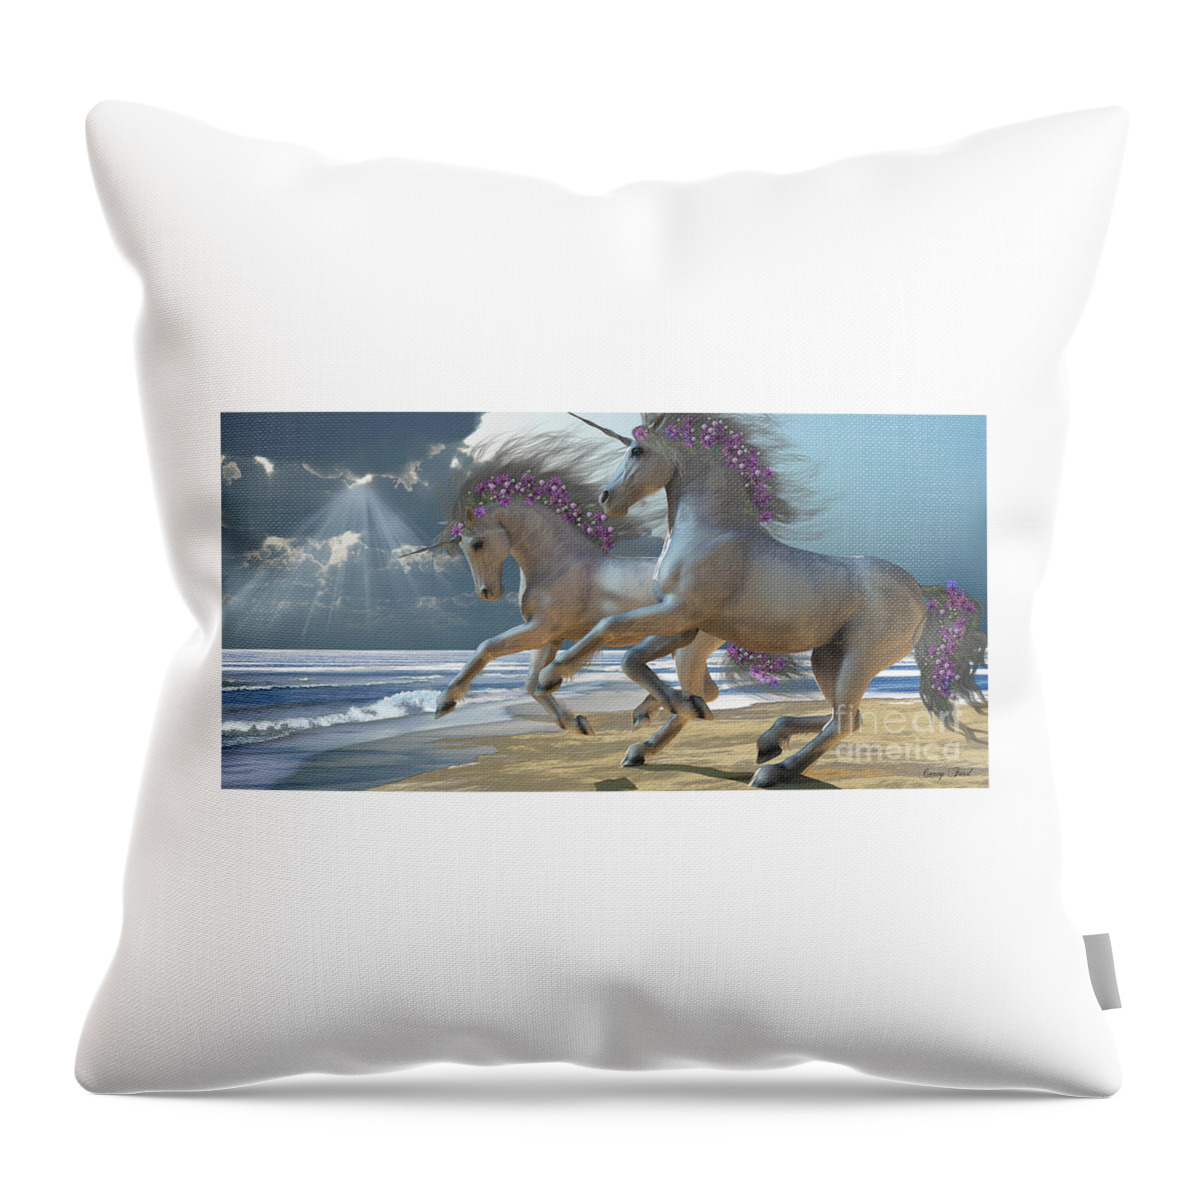 Unicorn Throw Pillow featuring the painting Playing Unicorns Part 2 by Corey Ford